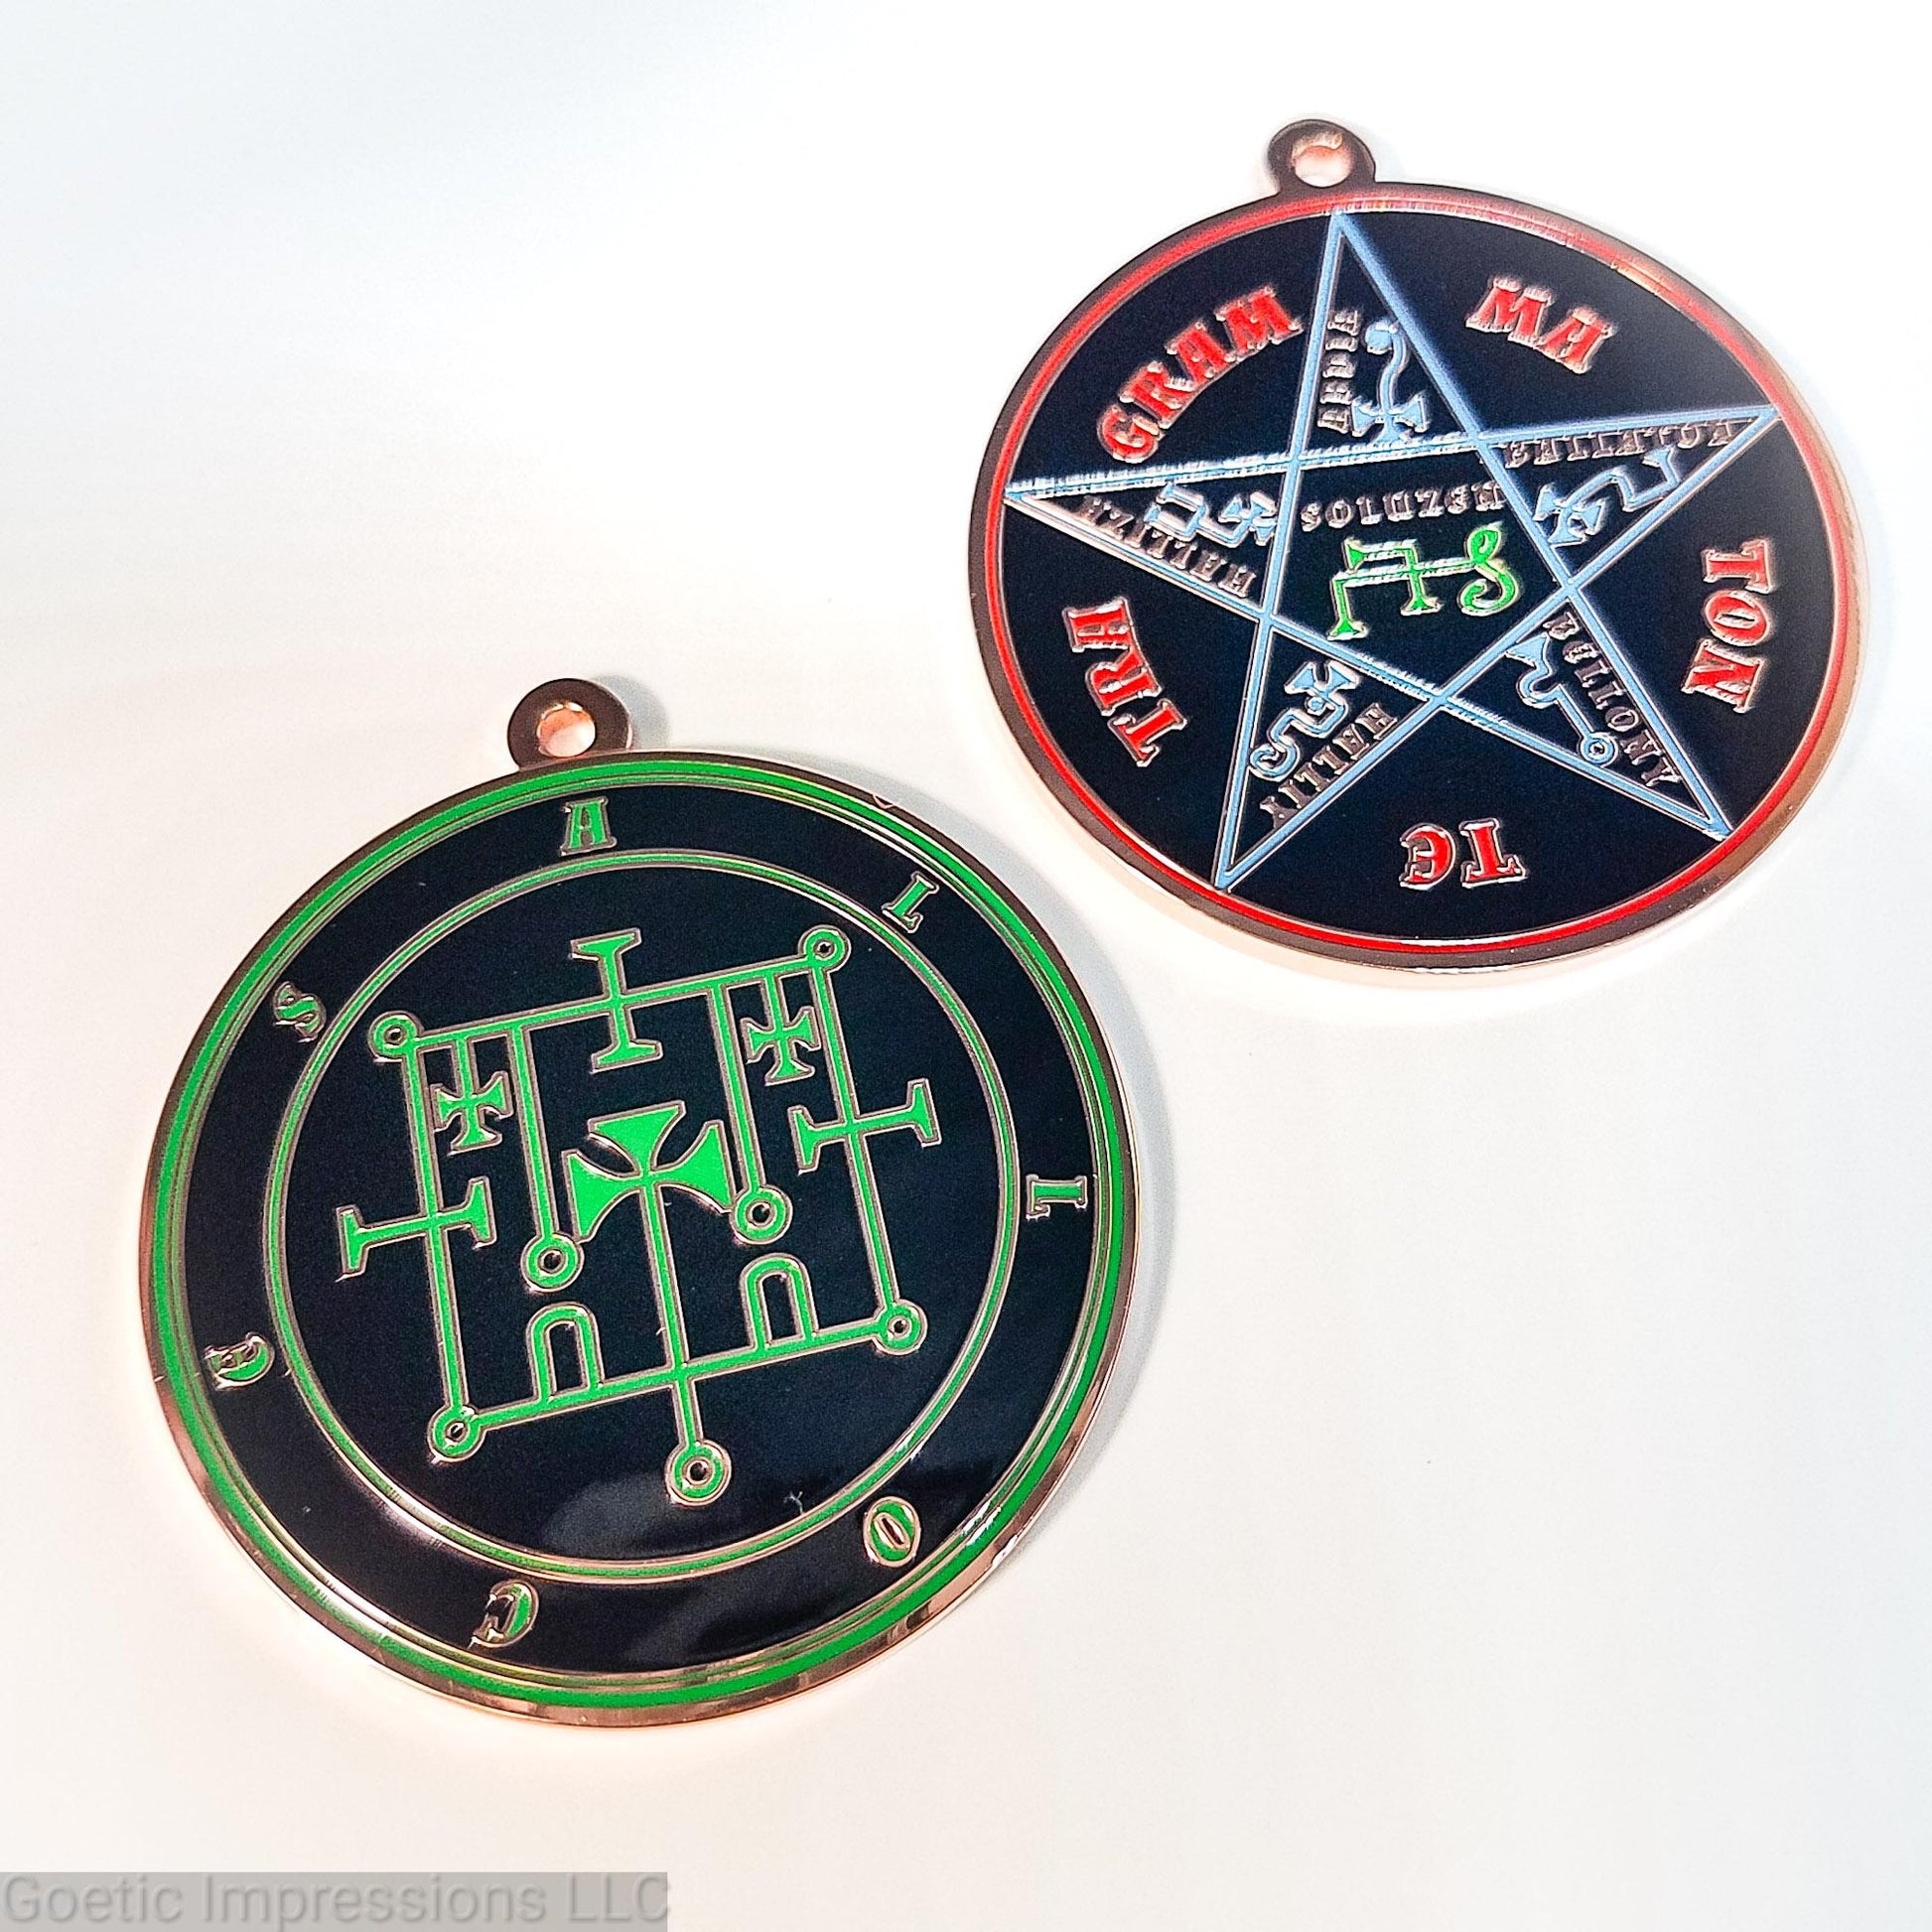 Alloces sigil medallion with the Pentacle of Solomon on reverse side.